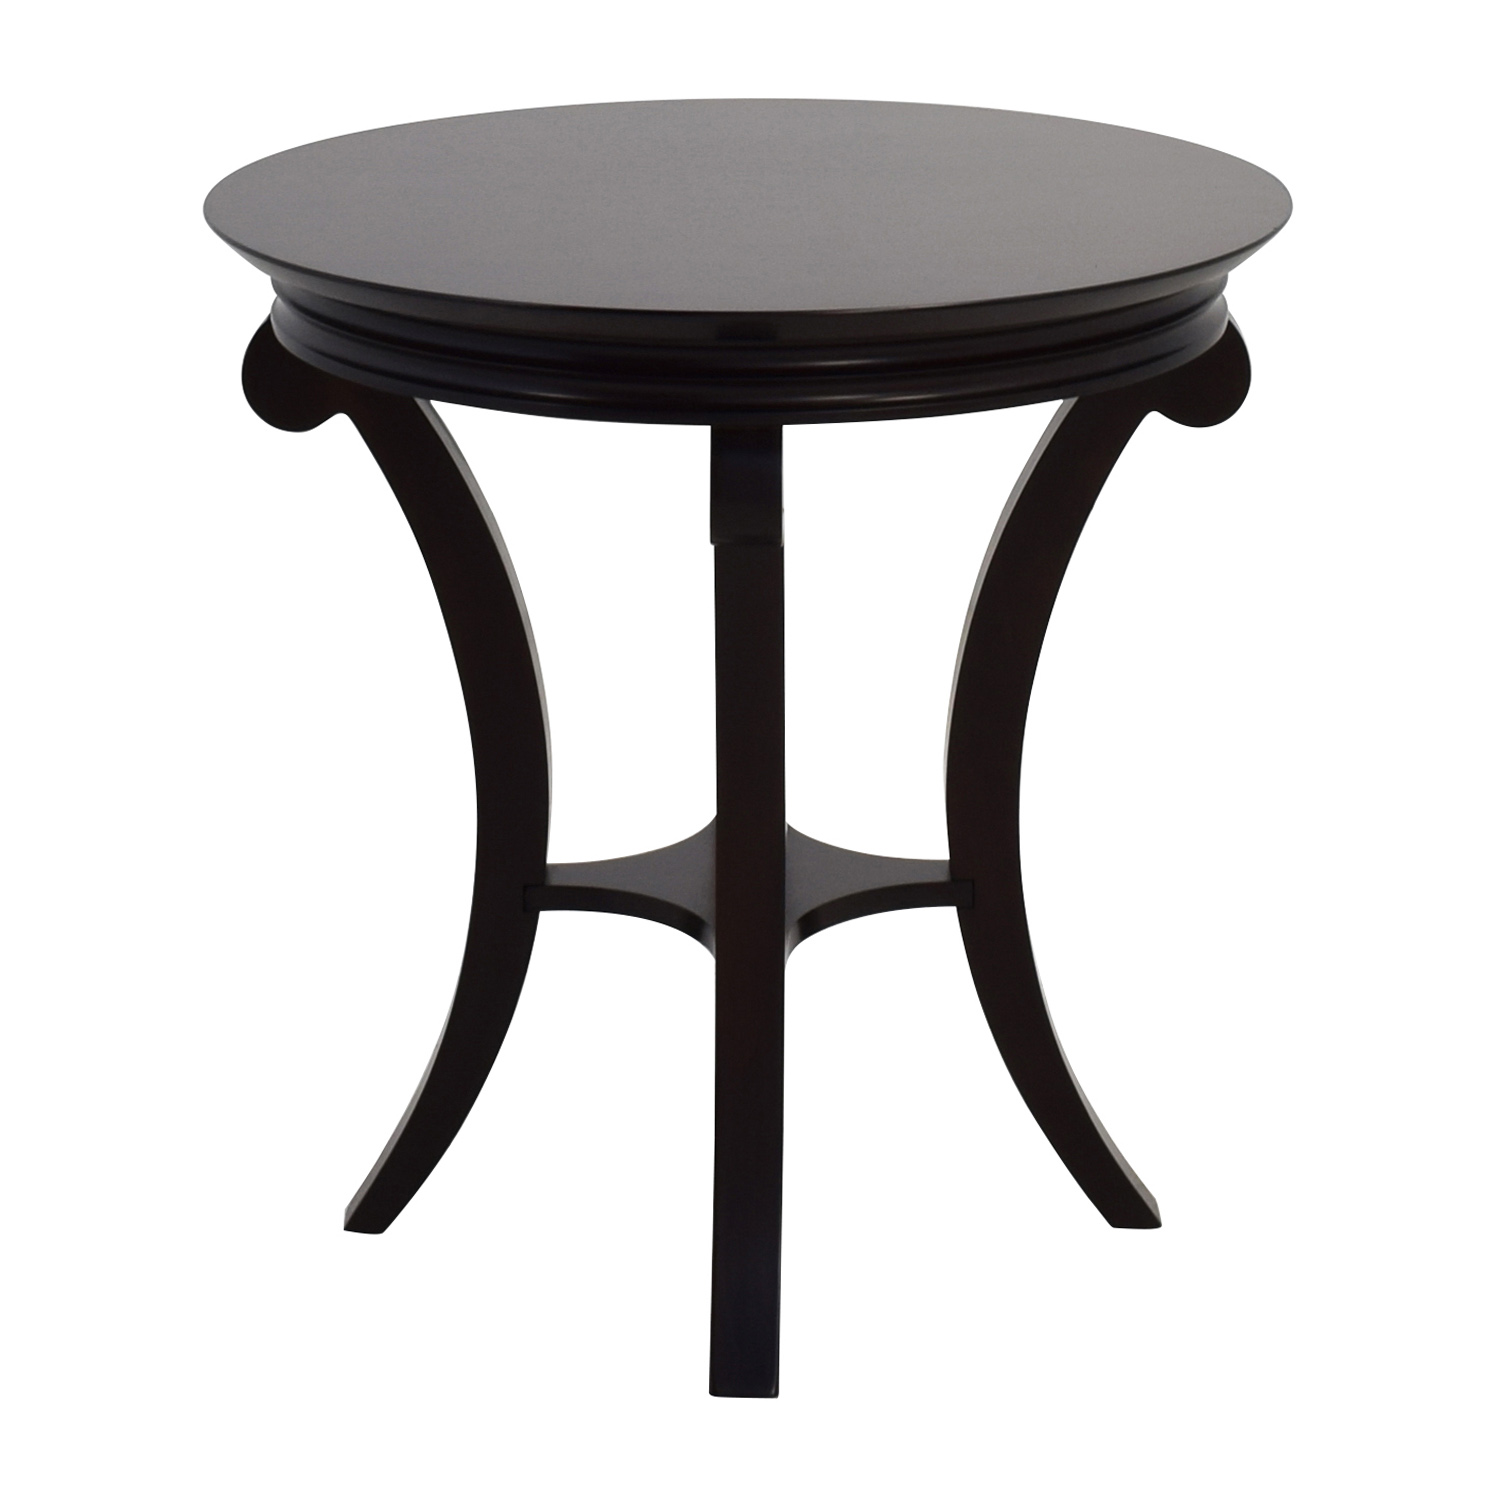 lovely decoration dining room accent tables half round table creative design mahogany side super thin console patio end clearance grey placemats slim lamp furniture market astoria